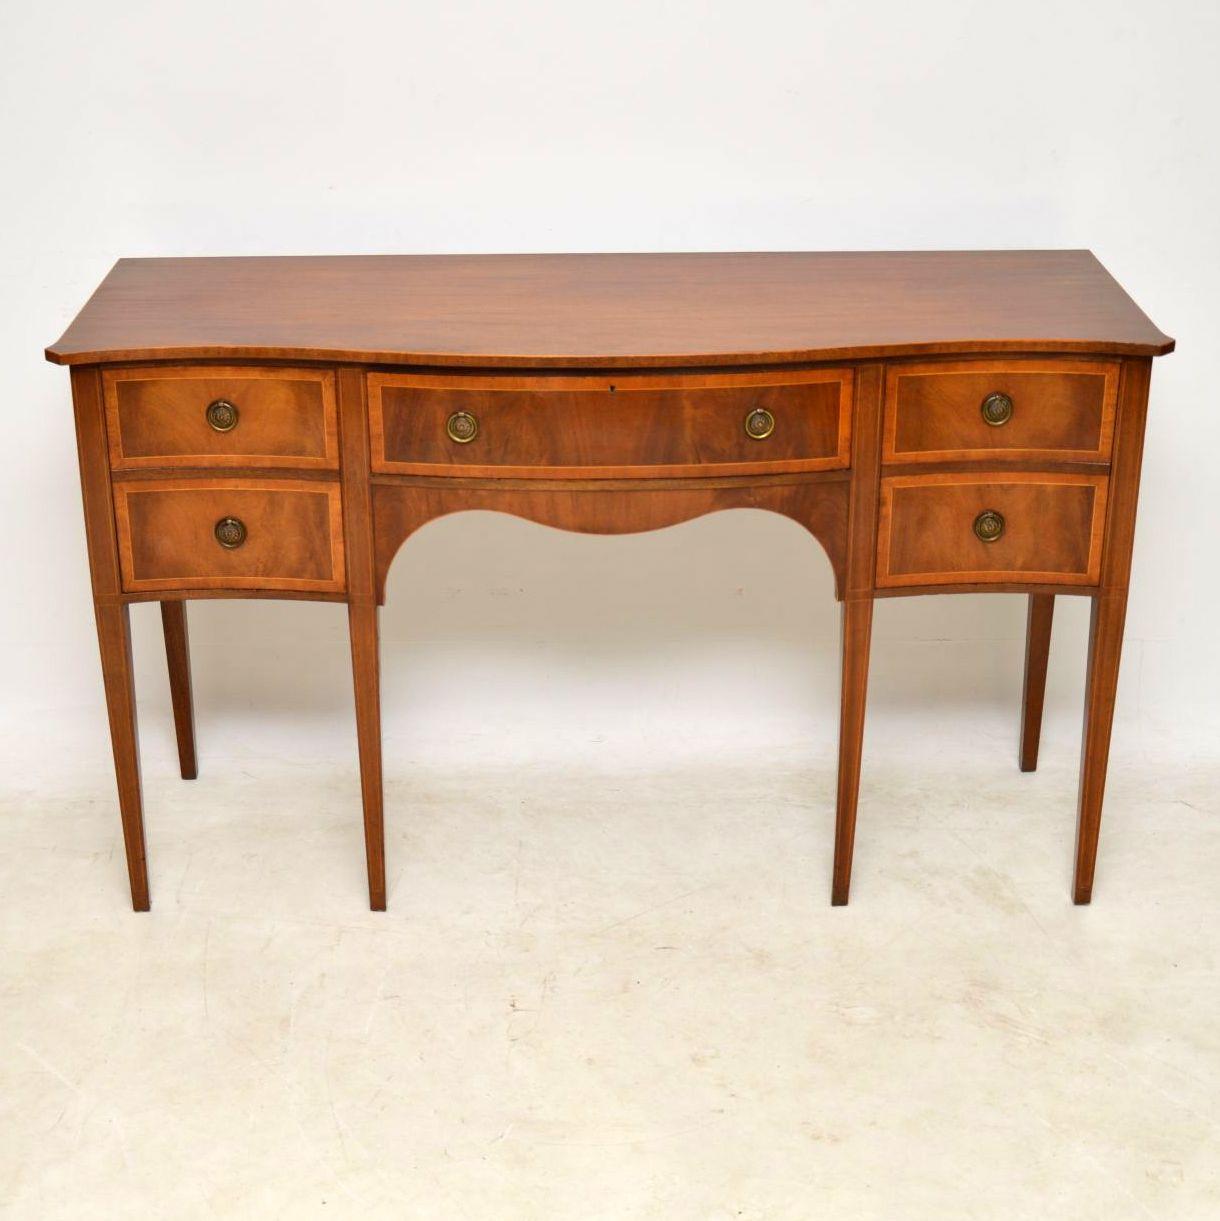 Antique Sheraton style mahogany sideboard in excellent condition and dating from about the 1950s period. It has a serpentine shaped front with dummy drawers on either side that are really cupboards and a proper drawer in the middle. There’s fine